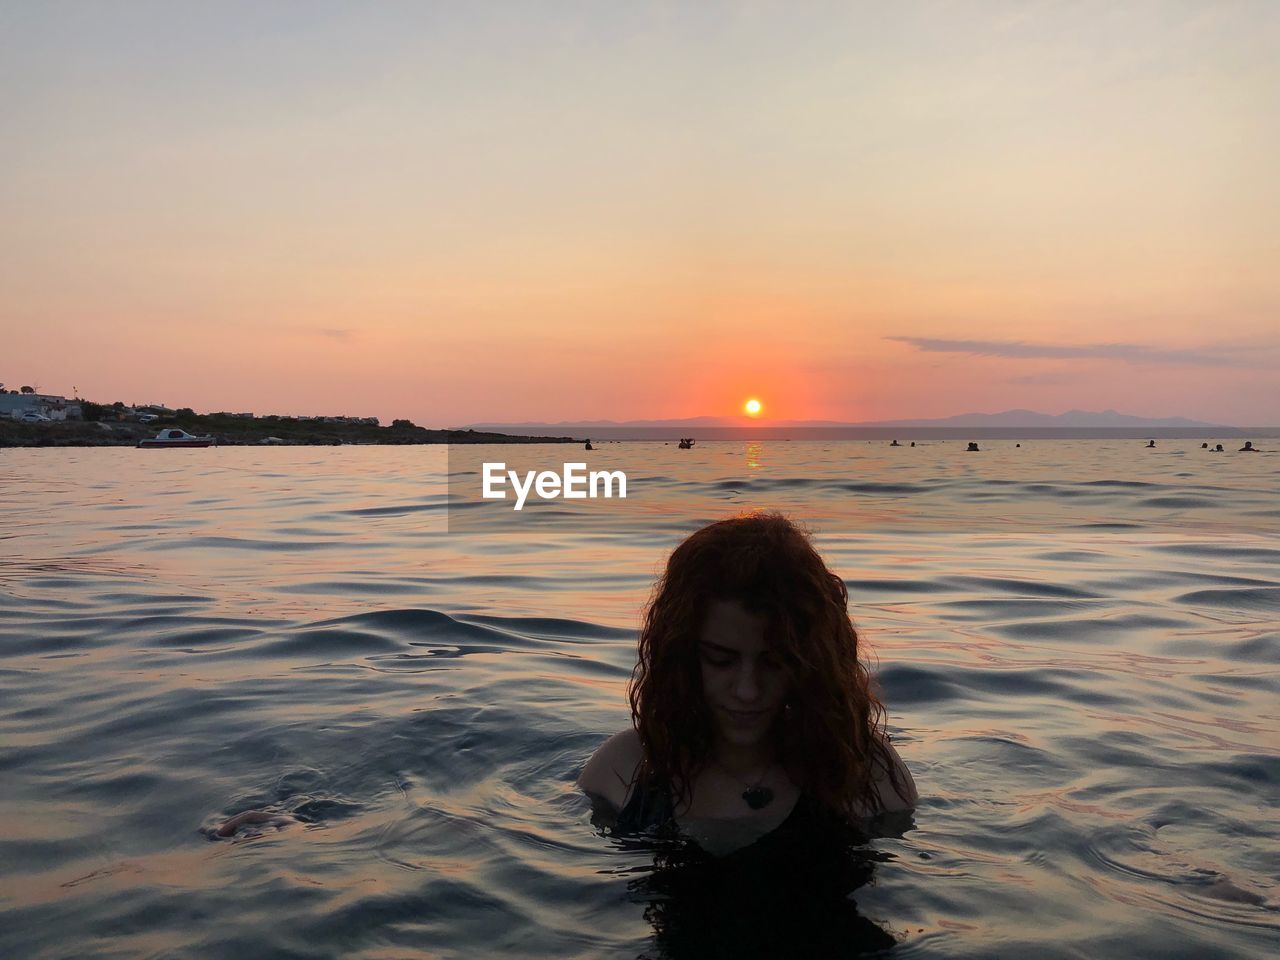 PORTRAIT OF YOUNG WOMAN AGAINST SEA DURING SUNSET